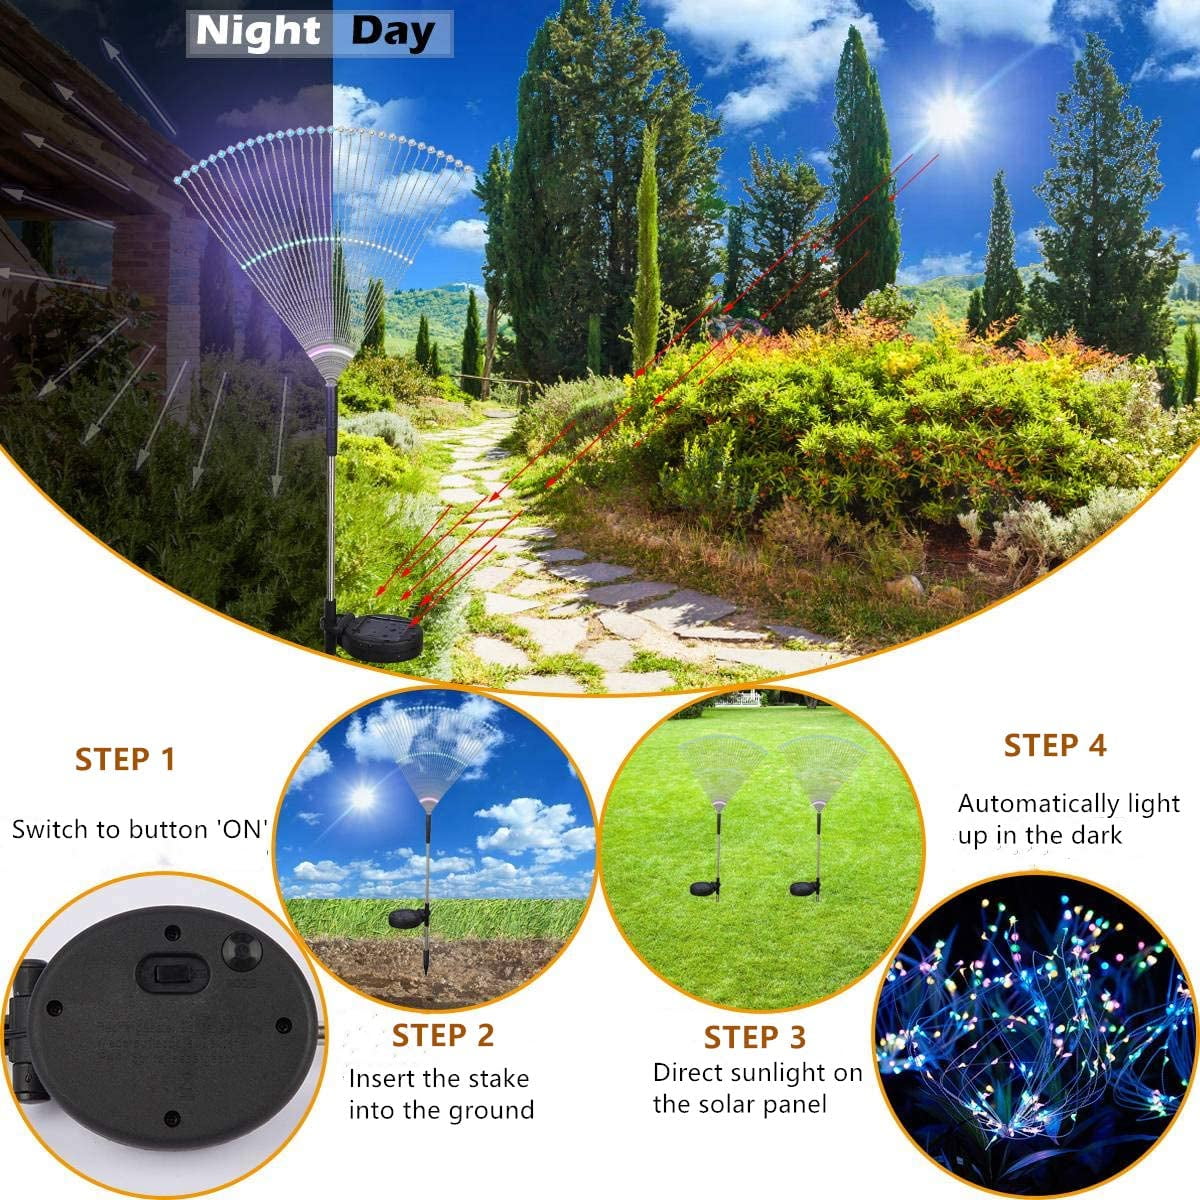 Solarera Solar Lights Outdoor - 2 Pack Solar Garden Lights Outdoor Decorative with 120 LED Powered 40 Copper Wires Multi Color Sol - image 5 of 7